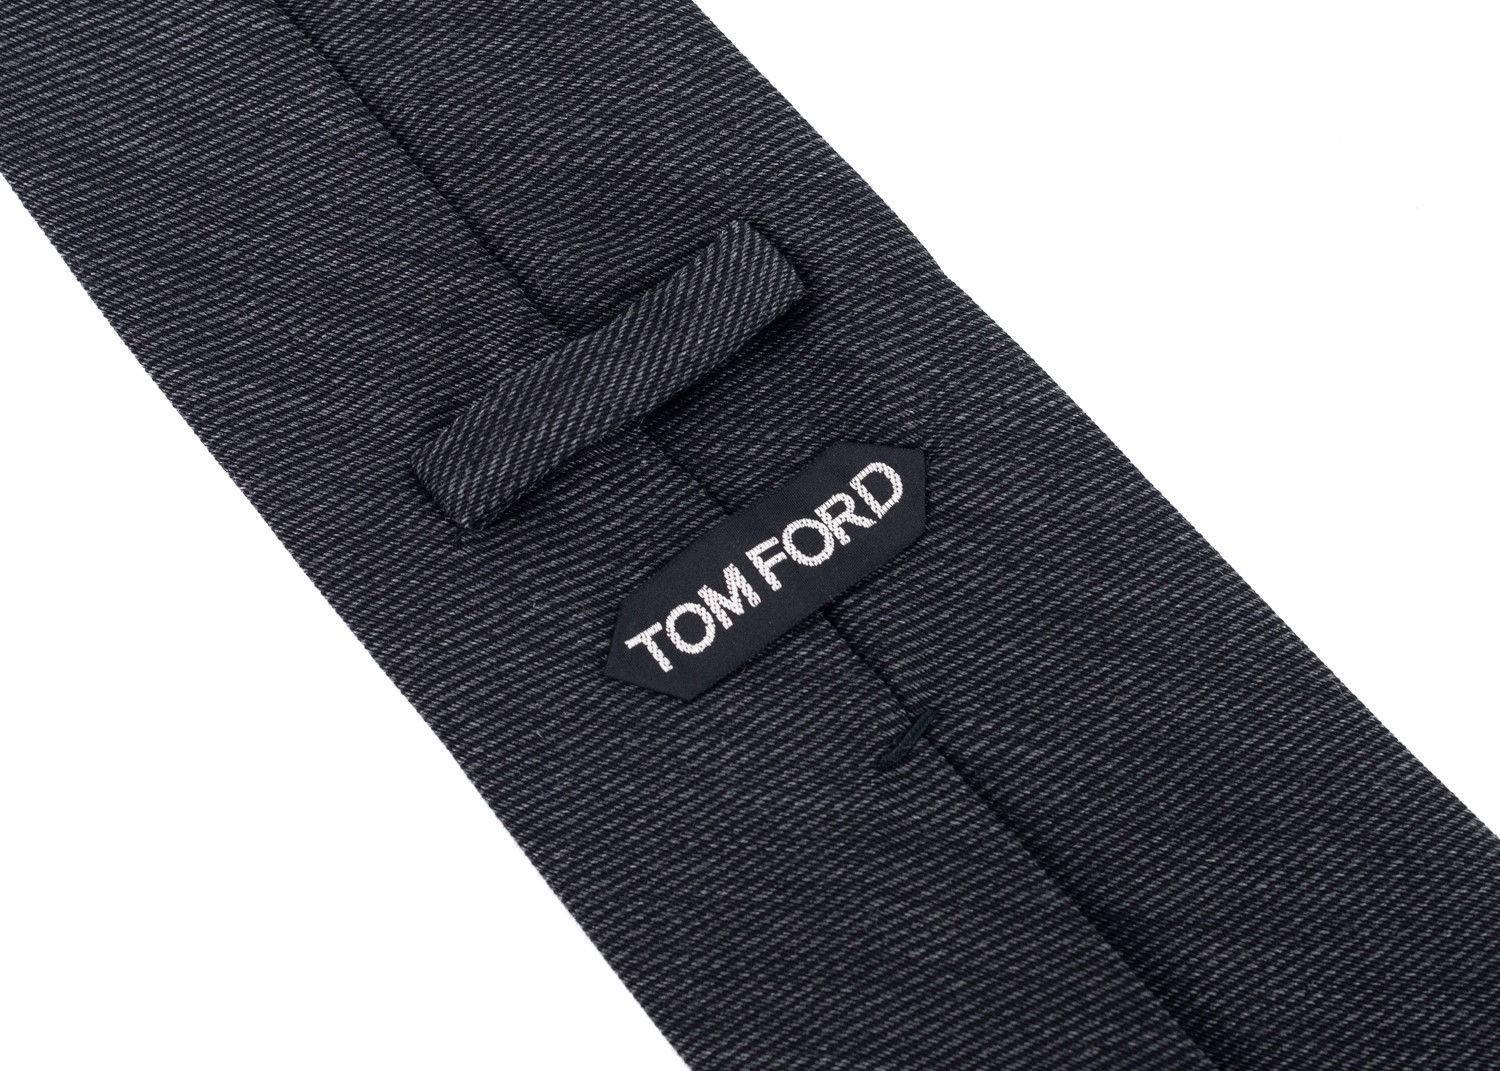 Italian luxury brand, Tom Ford, has crafted these gorgeous Wool Tie for important special occasions and professional events. The tie is great to pair with your favorite solid color button down and blazers with your chosen pair or classic trousers.